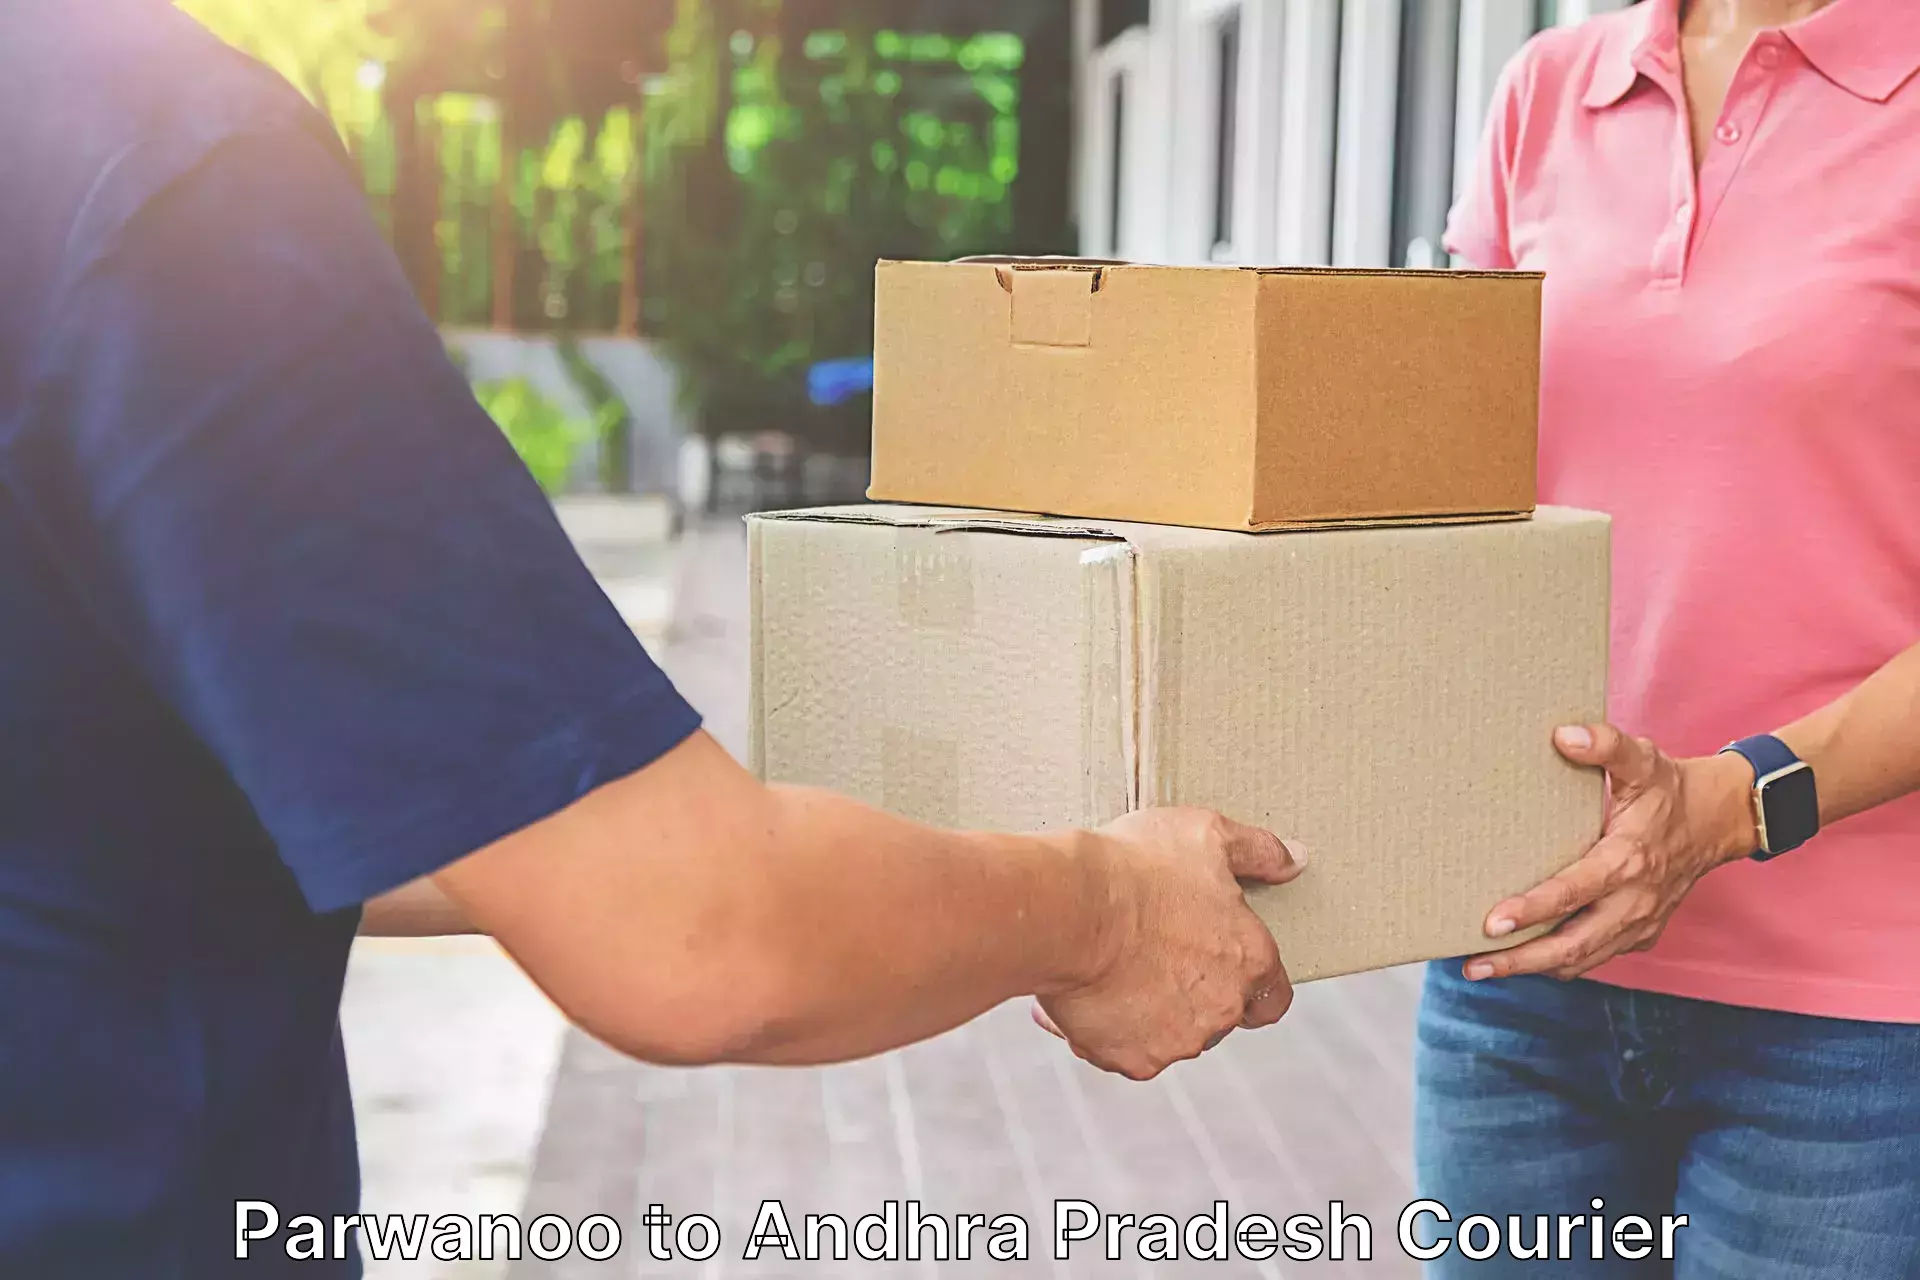 Professional courier handling Parwanoo to Kothapalli